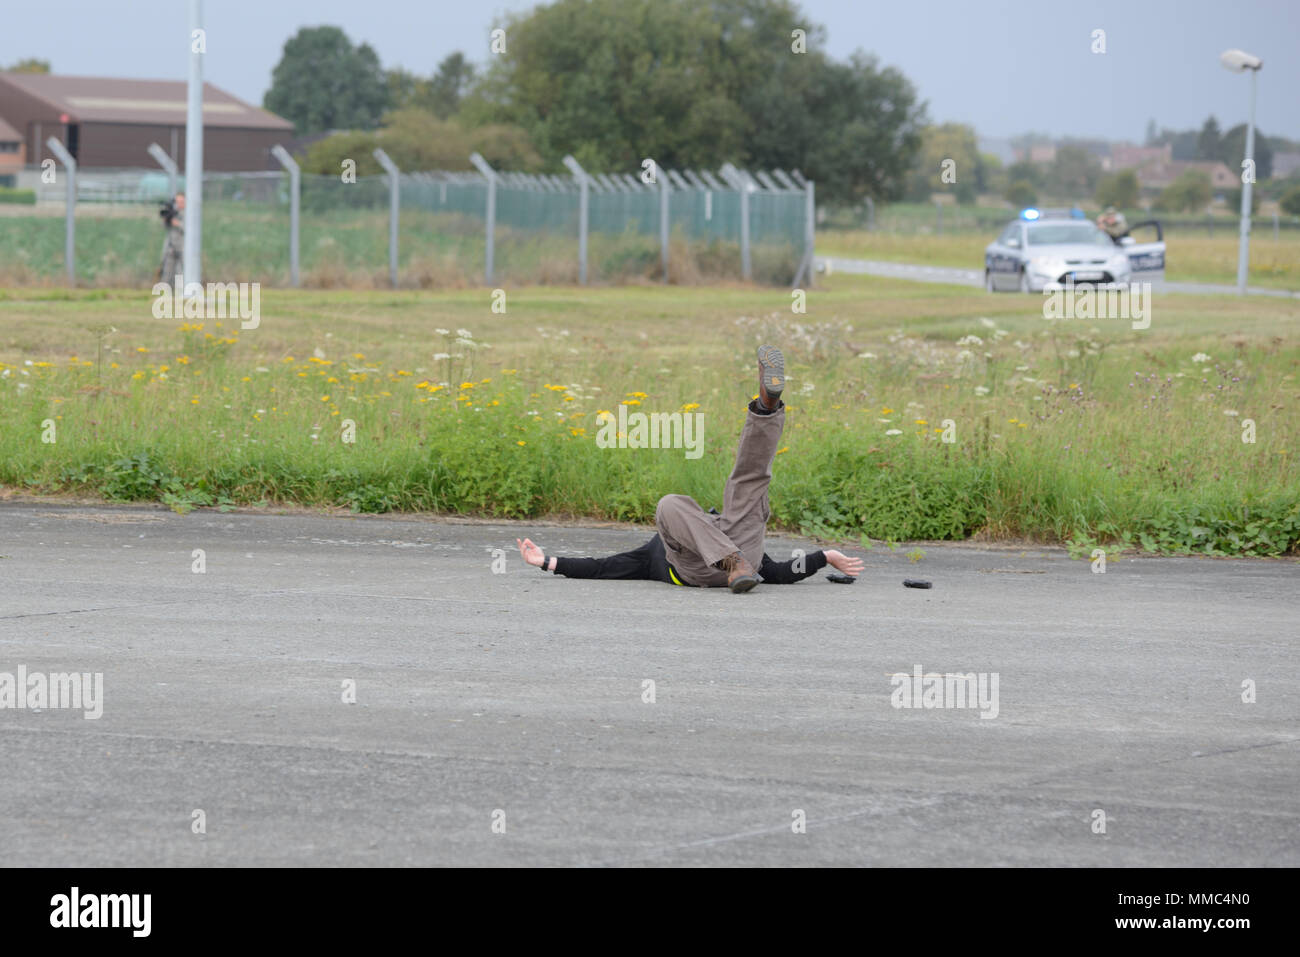 A role player falls on the ground and simulates being shot by the U.S. Army Military Police as U.S. Army Garrison Benelux holds Sentinel Shield 2017, a full scale exercise meant to test the collaboration between the garrison, tenant units and Belgian civilian agencies, on Chièvres Air Base, Belgium, Sep. 07, 2017. (U.S. Army photo by Visual Information Specialist Pierre-Etienne Courtejoie) Stock Photo